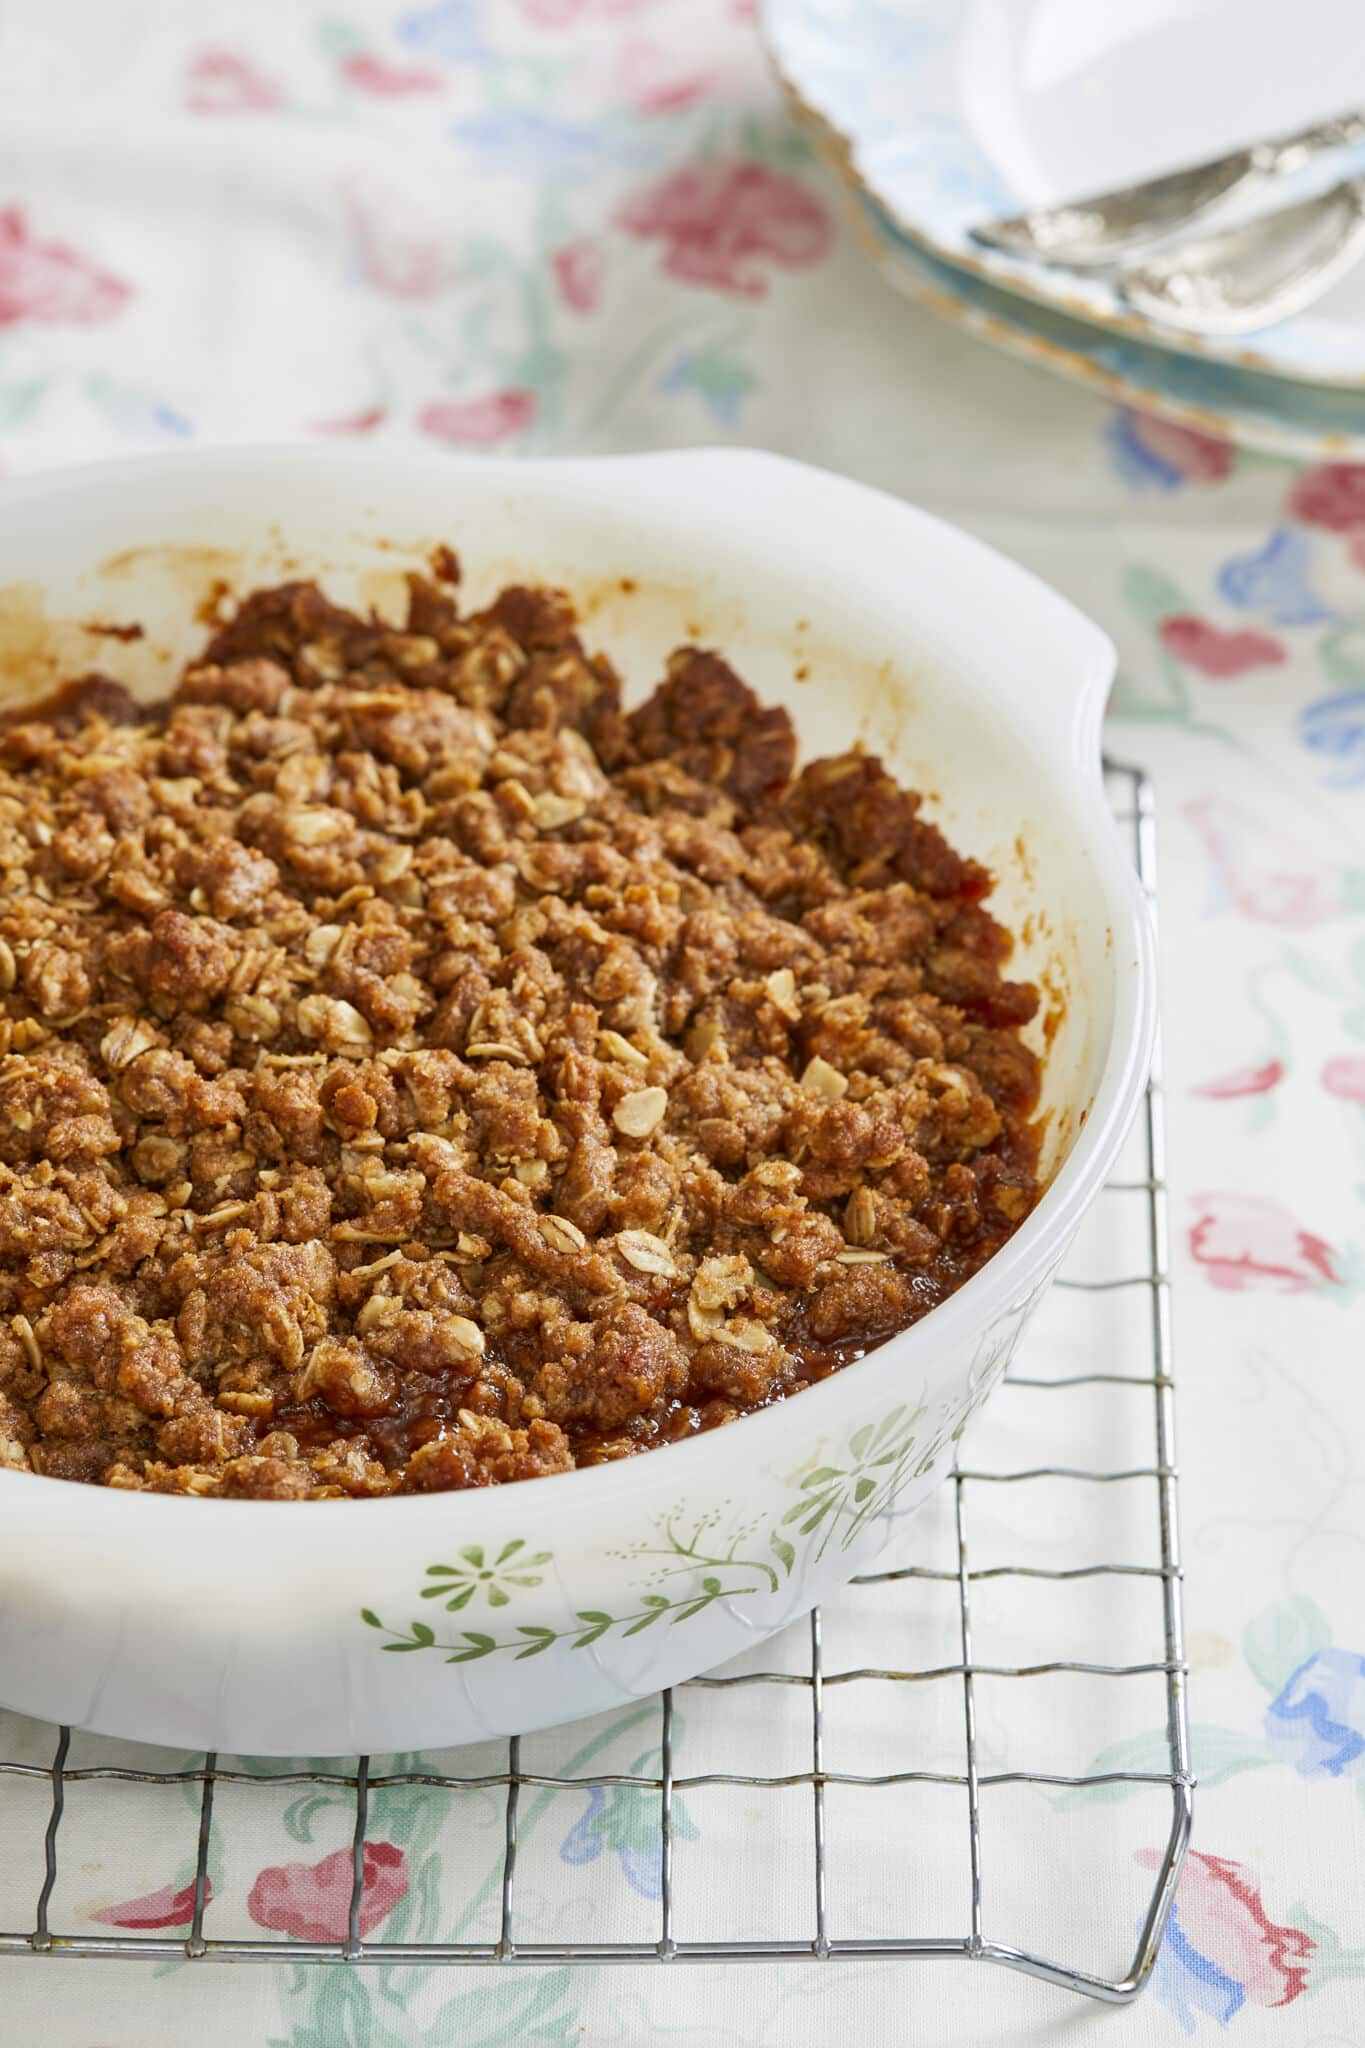 Boozy Whisky Apple Crisp is baked in a milkgalss Pyrex baking dish with sweet, buttery baked apples covered with a cinnamon oatmeal-cinnamon crispy top.